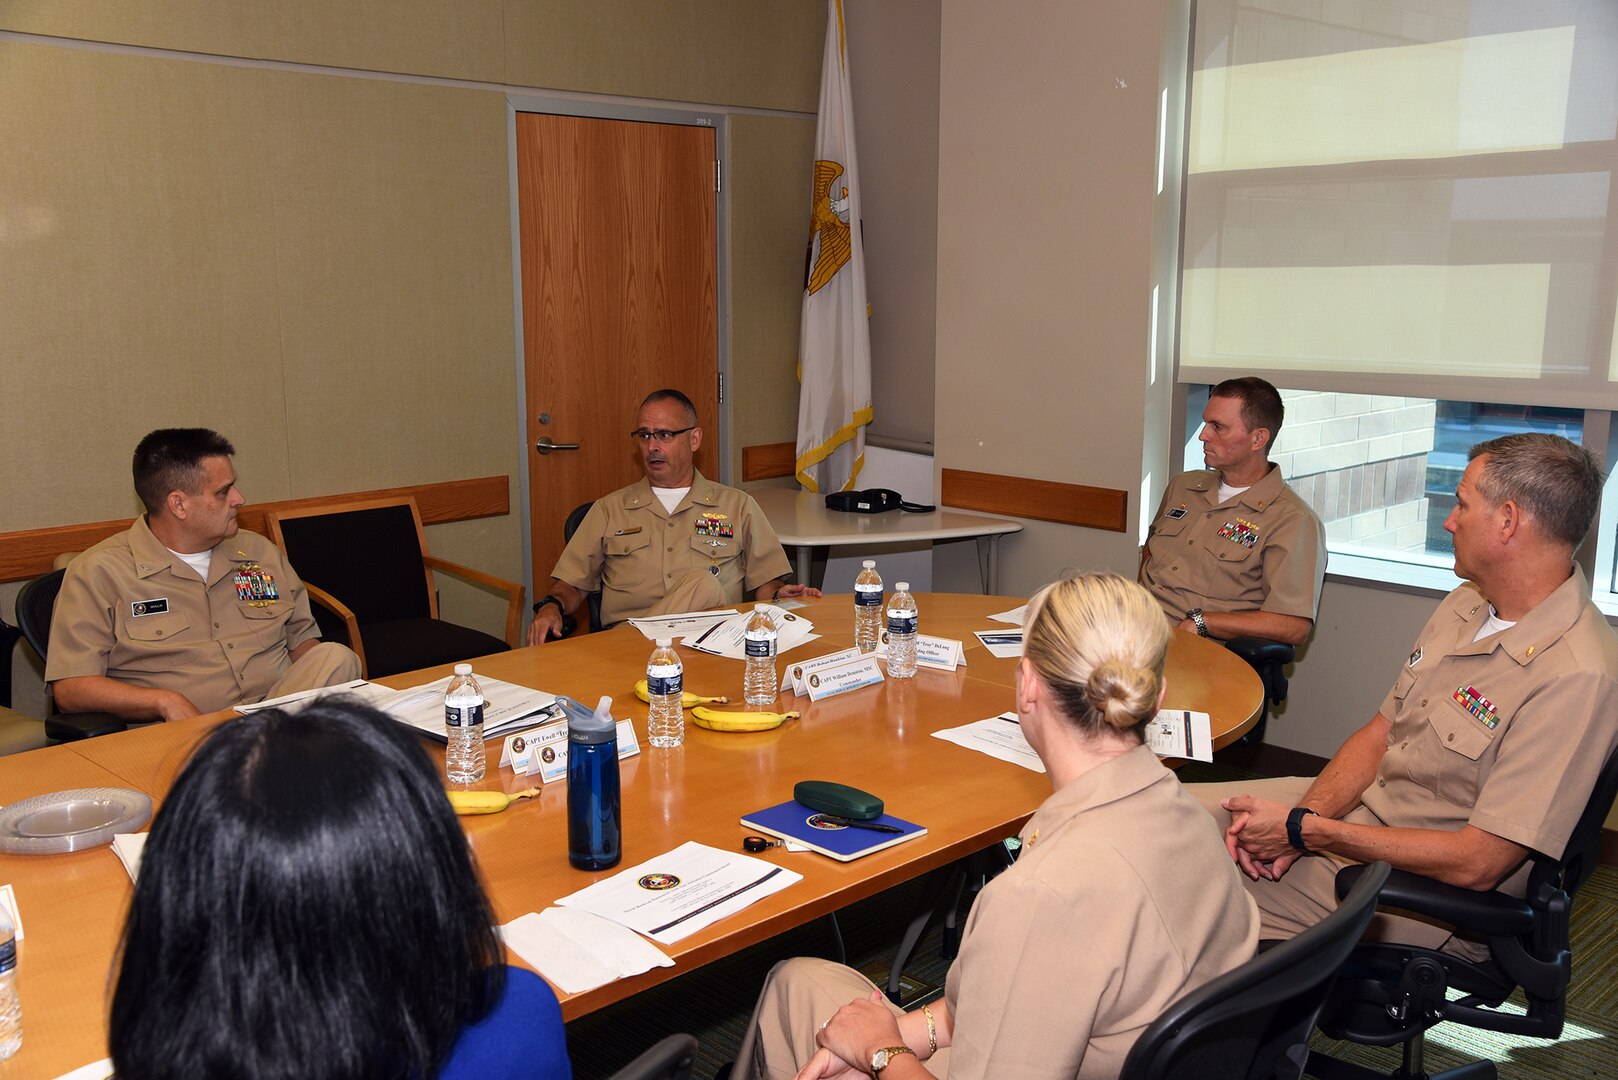 JOINT BASE SAN ANTONIO-FORT SAM HOUSTON – (Aug. 3, 2023) – Capt. Robert Hawkins (center-left), director, J3/5/7, Defense Health Agency (DHA) and director, U.S. Navy Nurse Corps, speaks on the culture of Navy Medicine and Navy Medical Research during a visit to Naval Medical Research Unit (NAMRU) San Antonio.  He, along with Capt. William Deniston, commander, Naval Medical Research Command (NMRC), received a tour of NAMRU San Antonio facilities at the Battlefield Health and Trauma Research Institute and Tri-Service Research Laboratory.  NAMRU San Antonio’s mission is to conduct gap driven combat casualty care, craniofacial, and directed energy research to improve survival, operational readiness, and safety of Department of Defense (DoD) personnel engaged in routine and expeditionary operations. It is one of the leading research and development laboratories for the U.S. Navy under the DoD and is one of eight subordinate research commands in the global network of laboratories operating under NMRC in Silver Spring, Md. (U.S. Navy photo by Burrell Parmer, NAMRU San Antonio Public Affairs/Released)